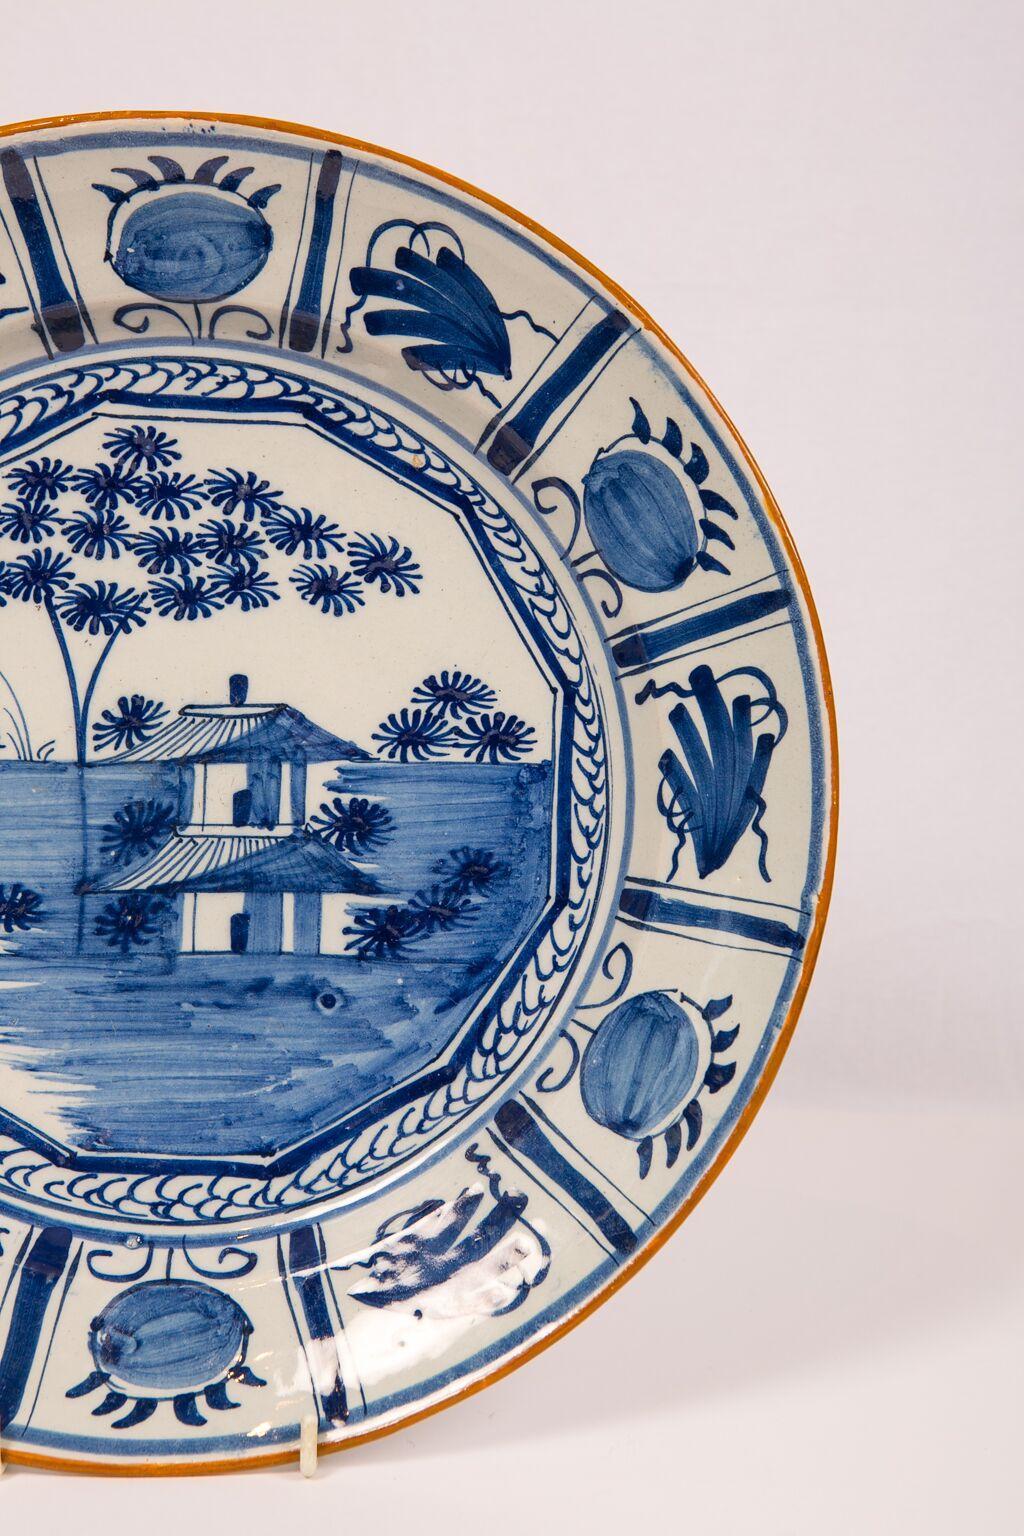 Dutch Large Blue and White Delft Charger 18th Century Made circa 1780 For Sale